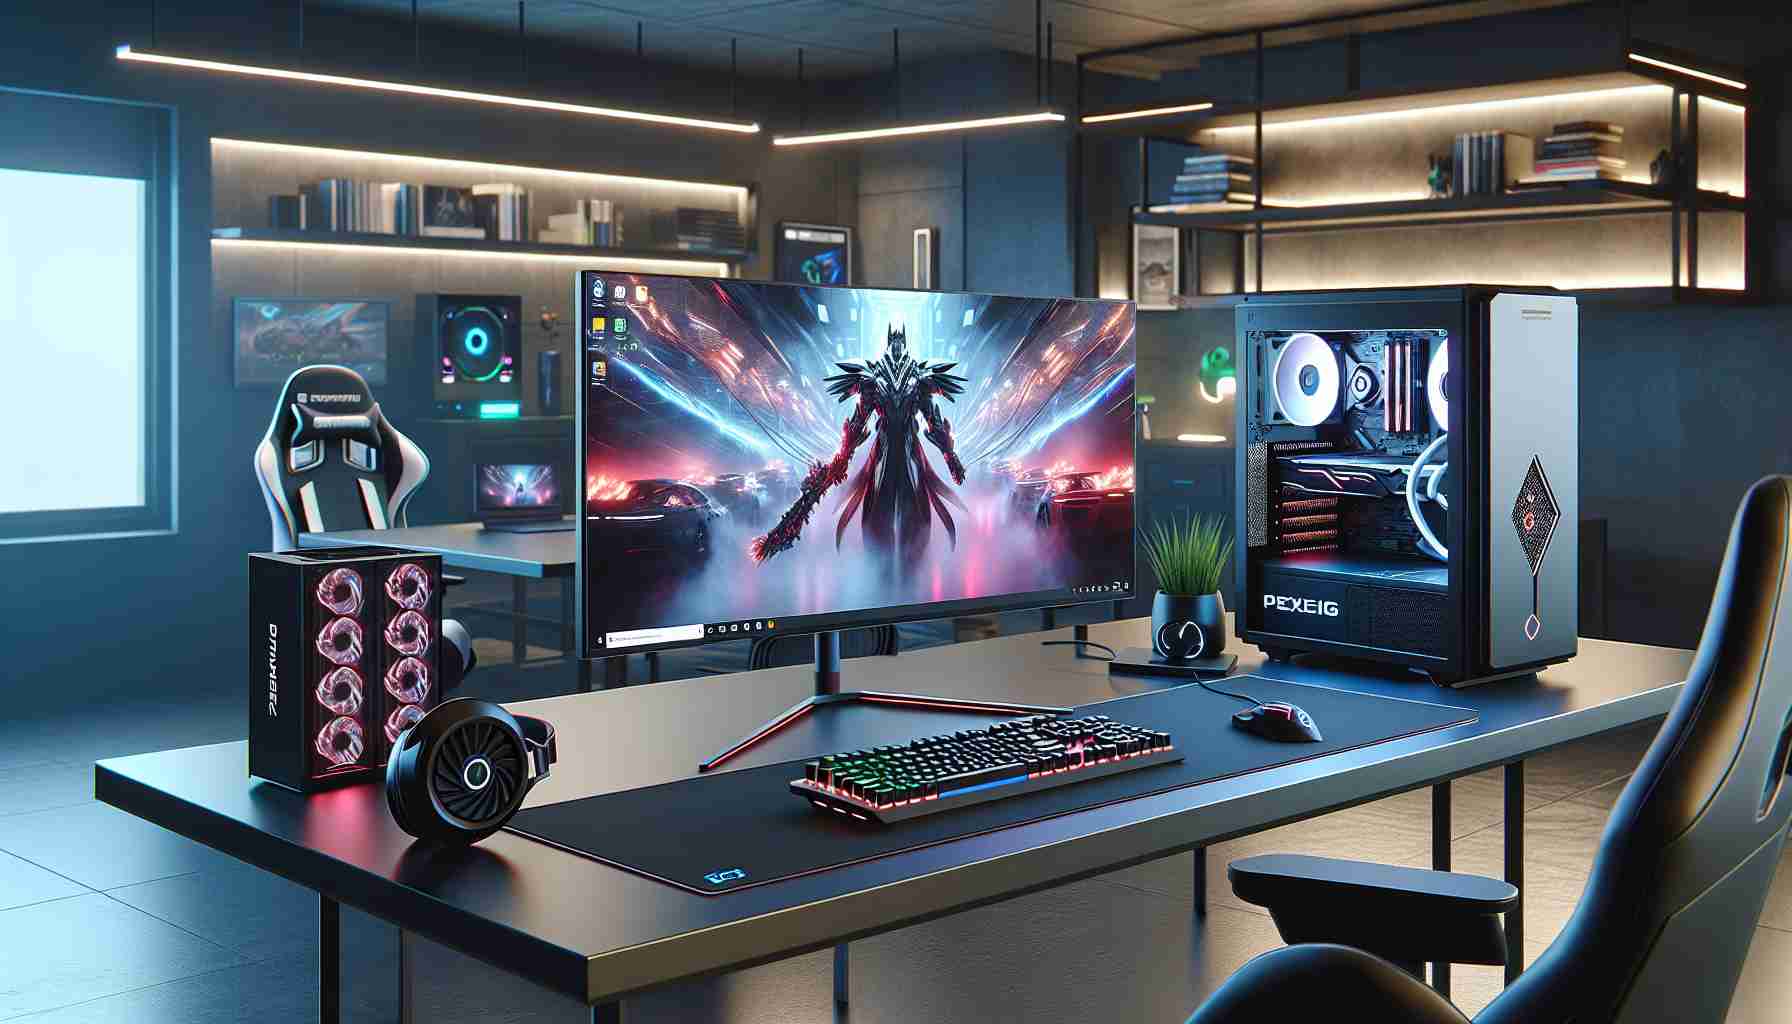 Revolutionize Your Gaming Experience with the Lenovo Gen 9 Series